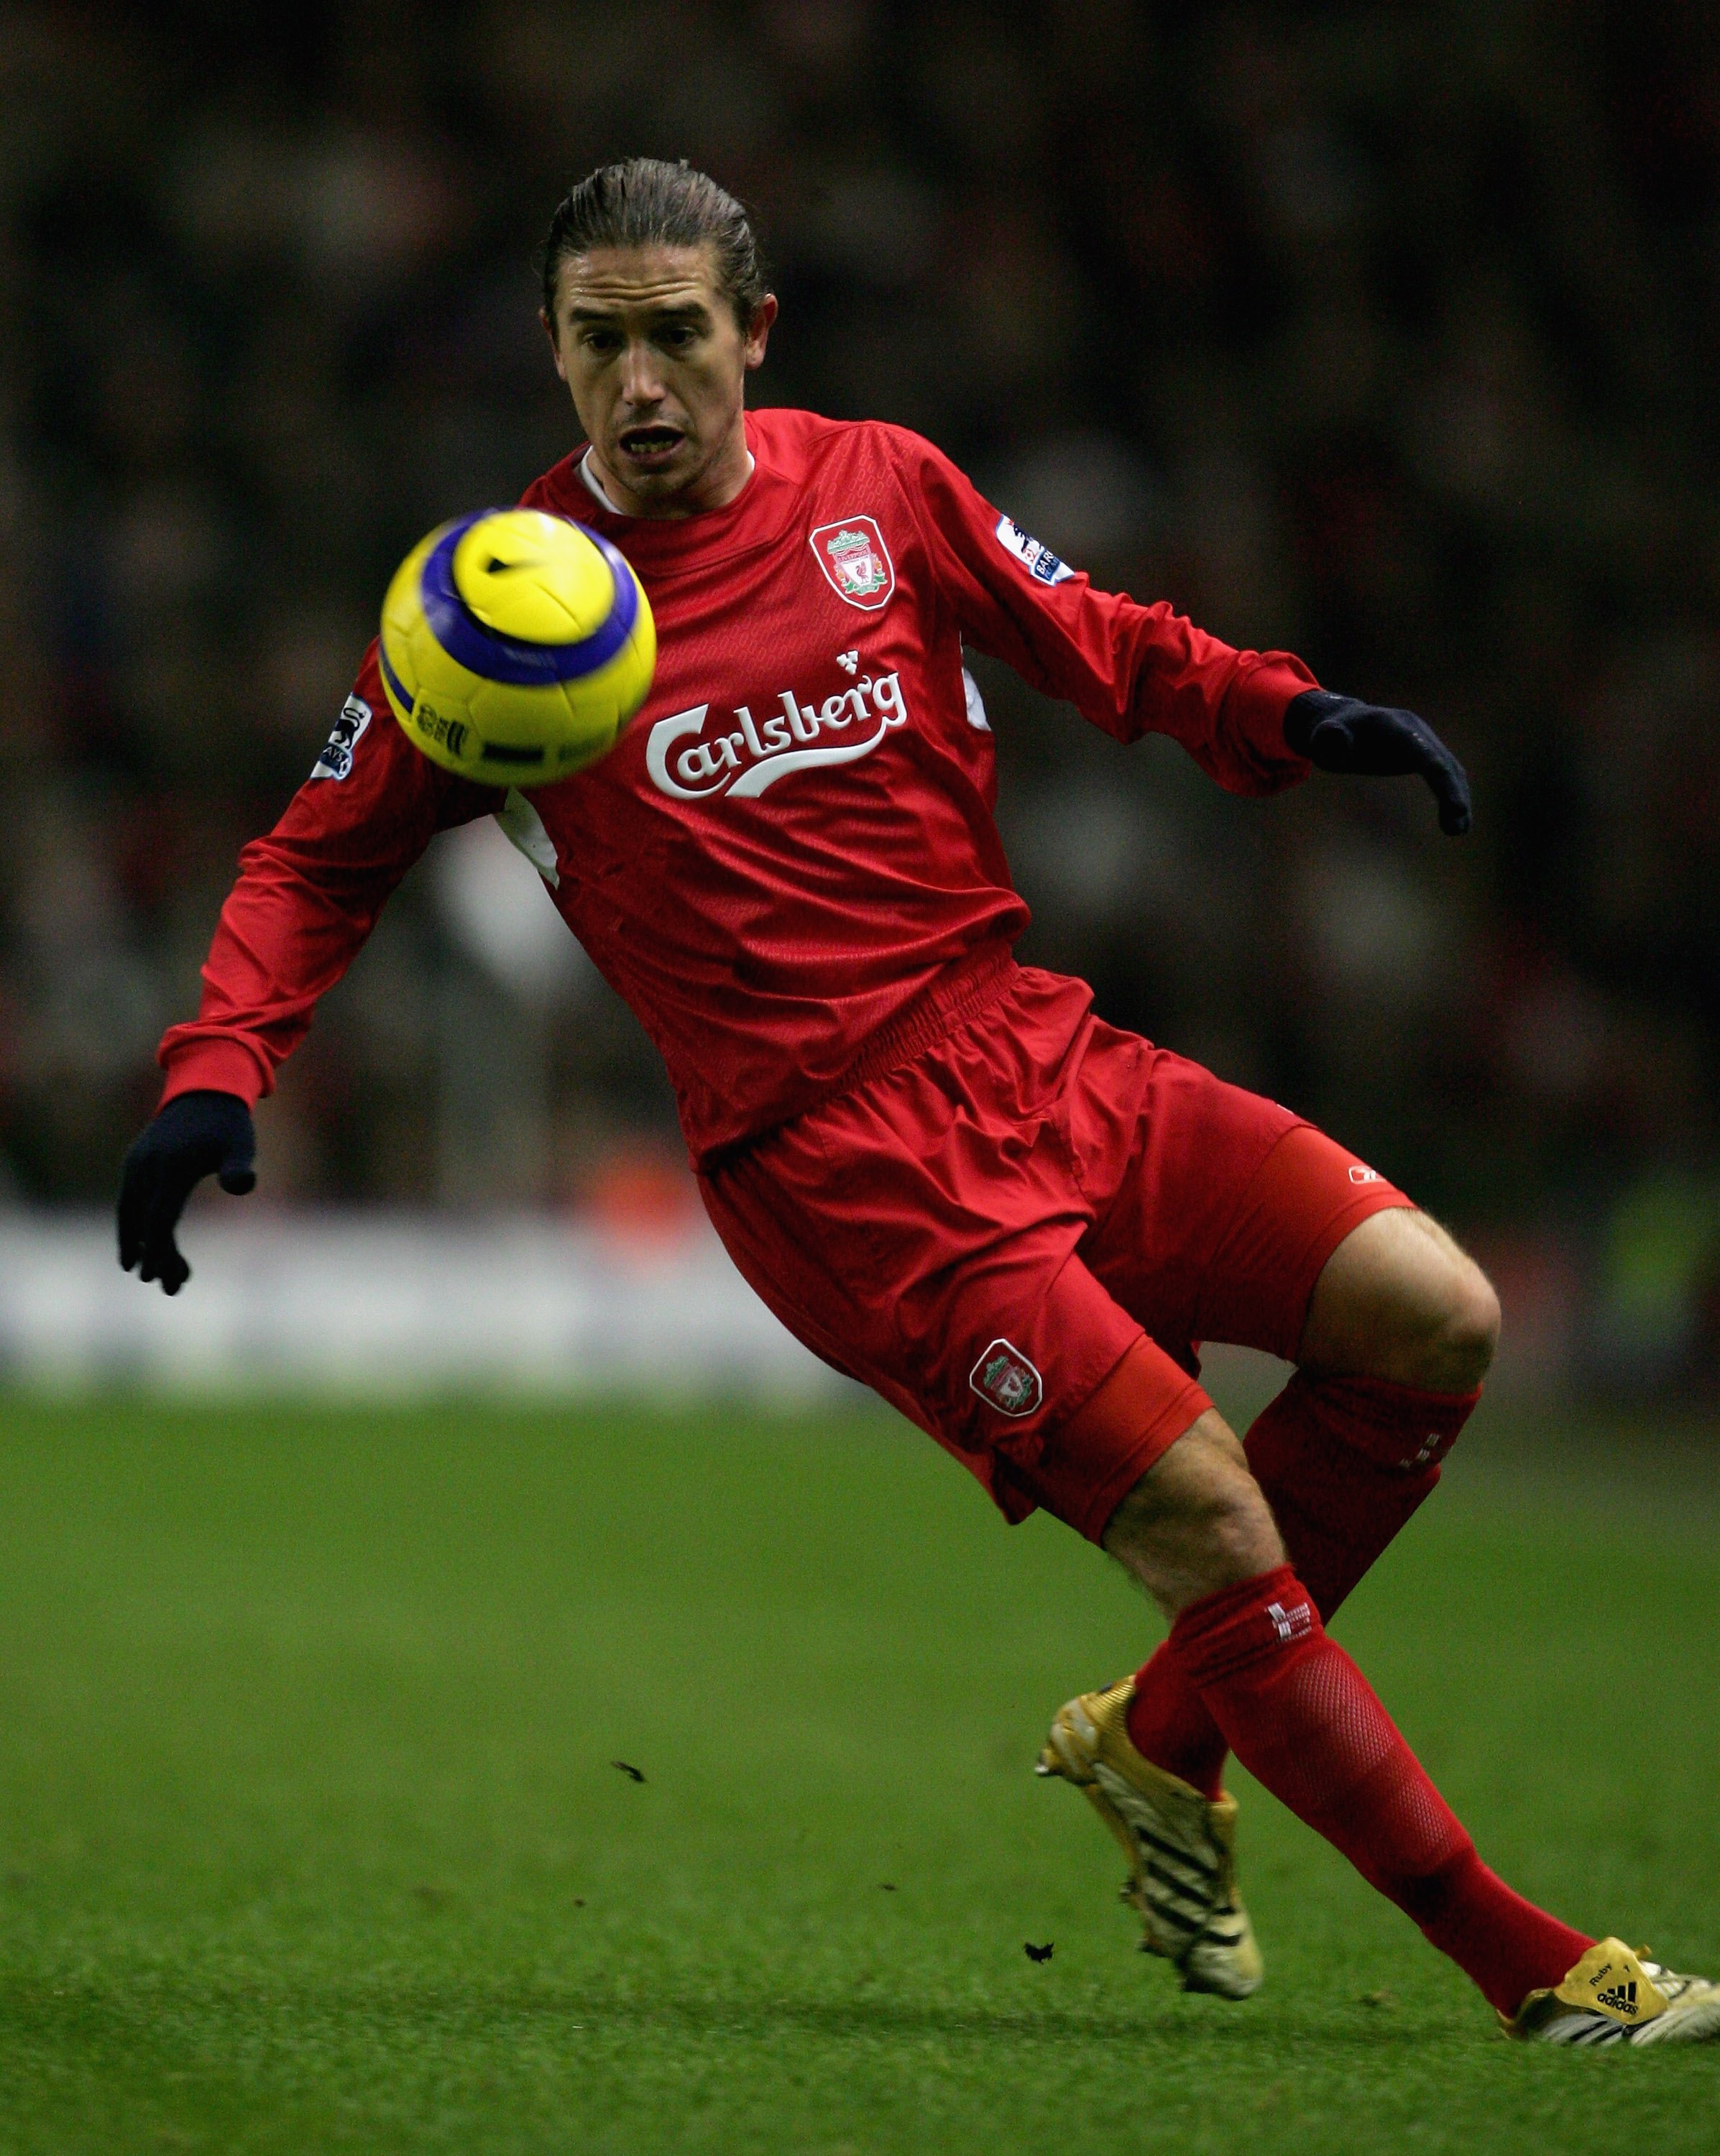 LIVERPOOL, UNITED KINGDOM - FEBRUARY 01:  Harry Kewell of Liverpool in action during the Barclays Premiership match between Liverpool and Birmingham City at Anfield on February 1, 2006 in Liverpool, England.  (Photo by Jamie McDonald/Getty Images)